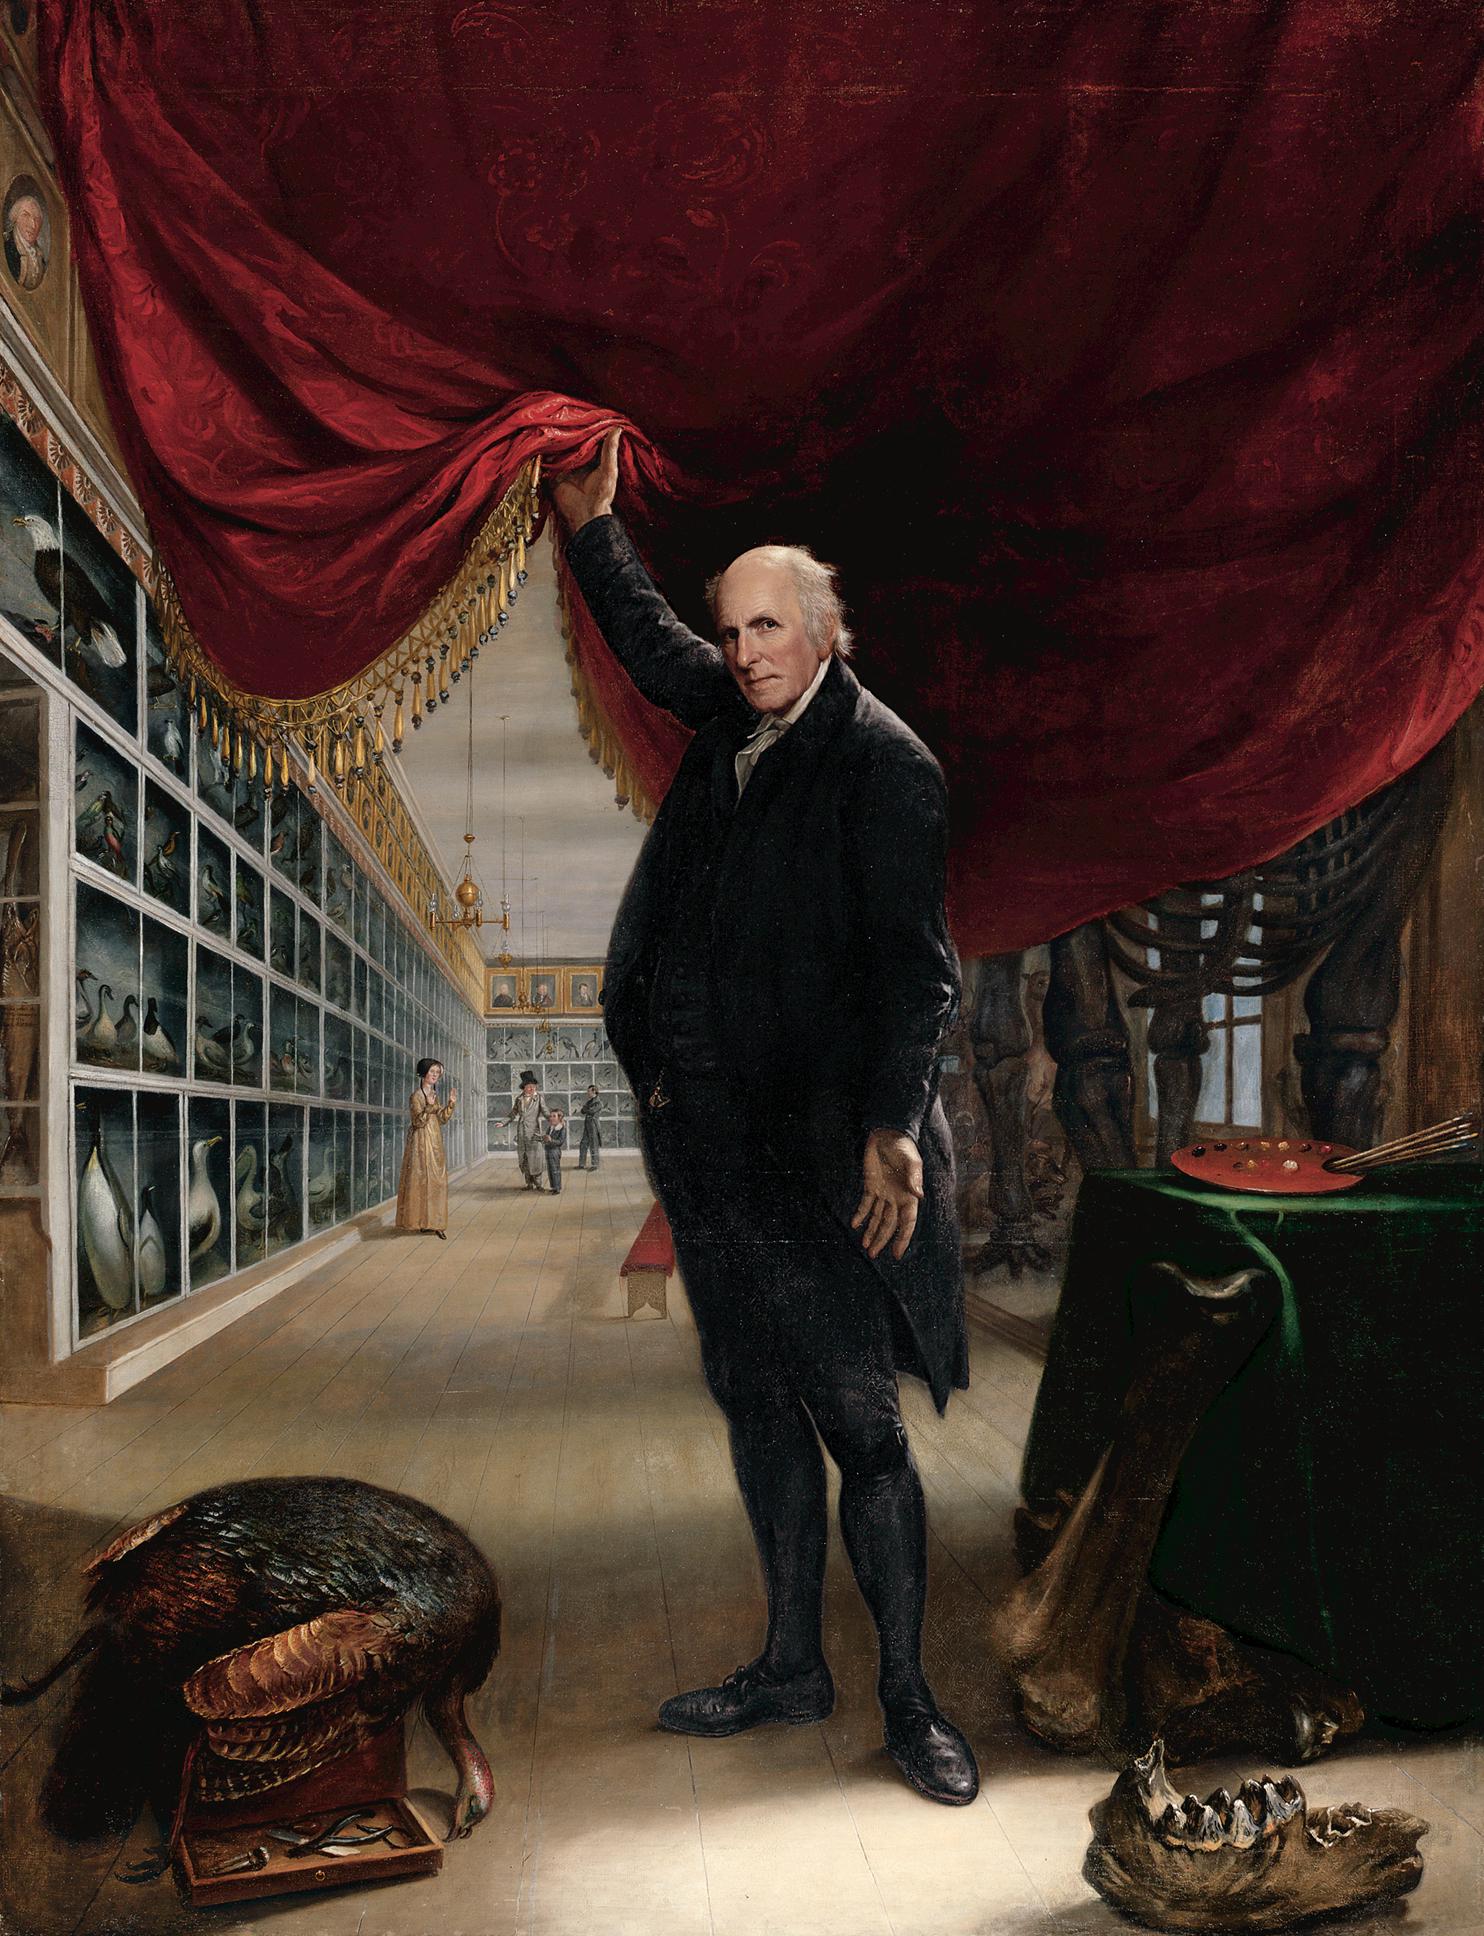 The Artist in His Studio by Charles Willson Peale - 1822 - 263.53 x 202.88 cm Pennsylvania Academy of the Fine Arts